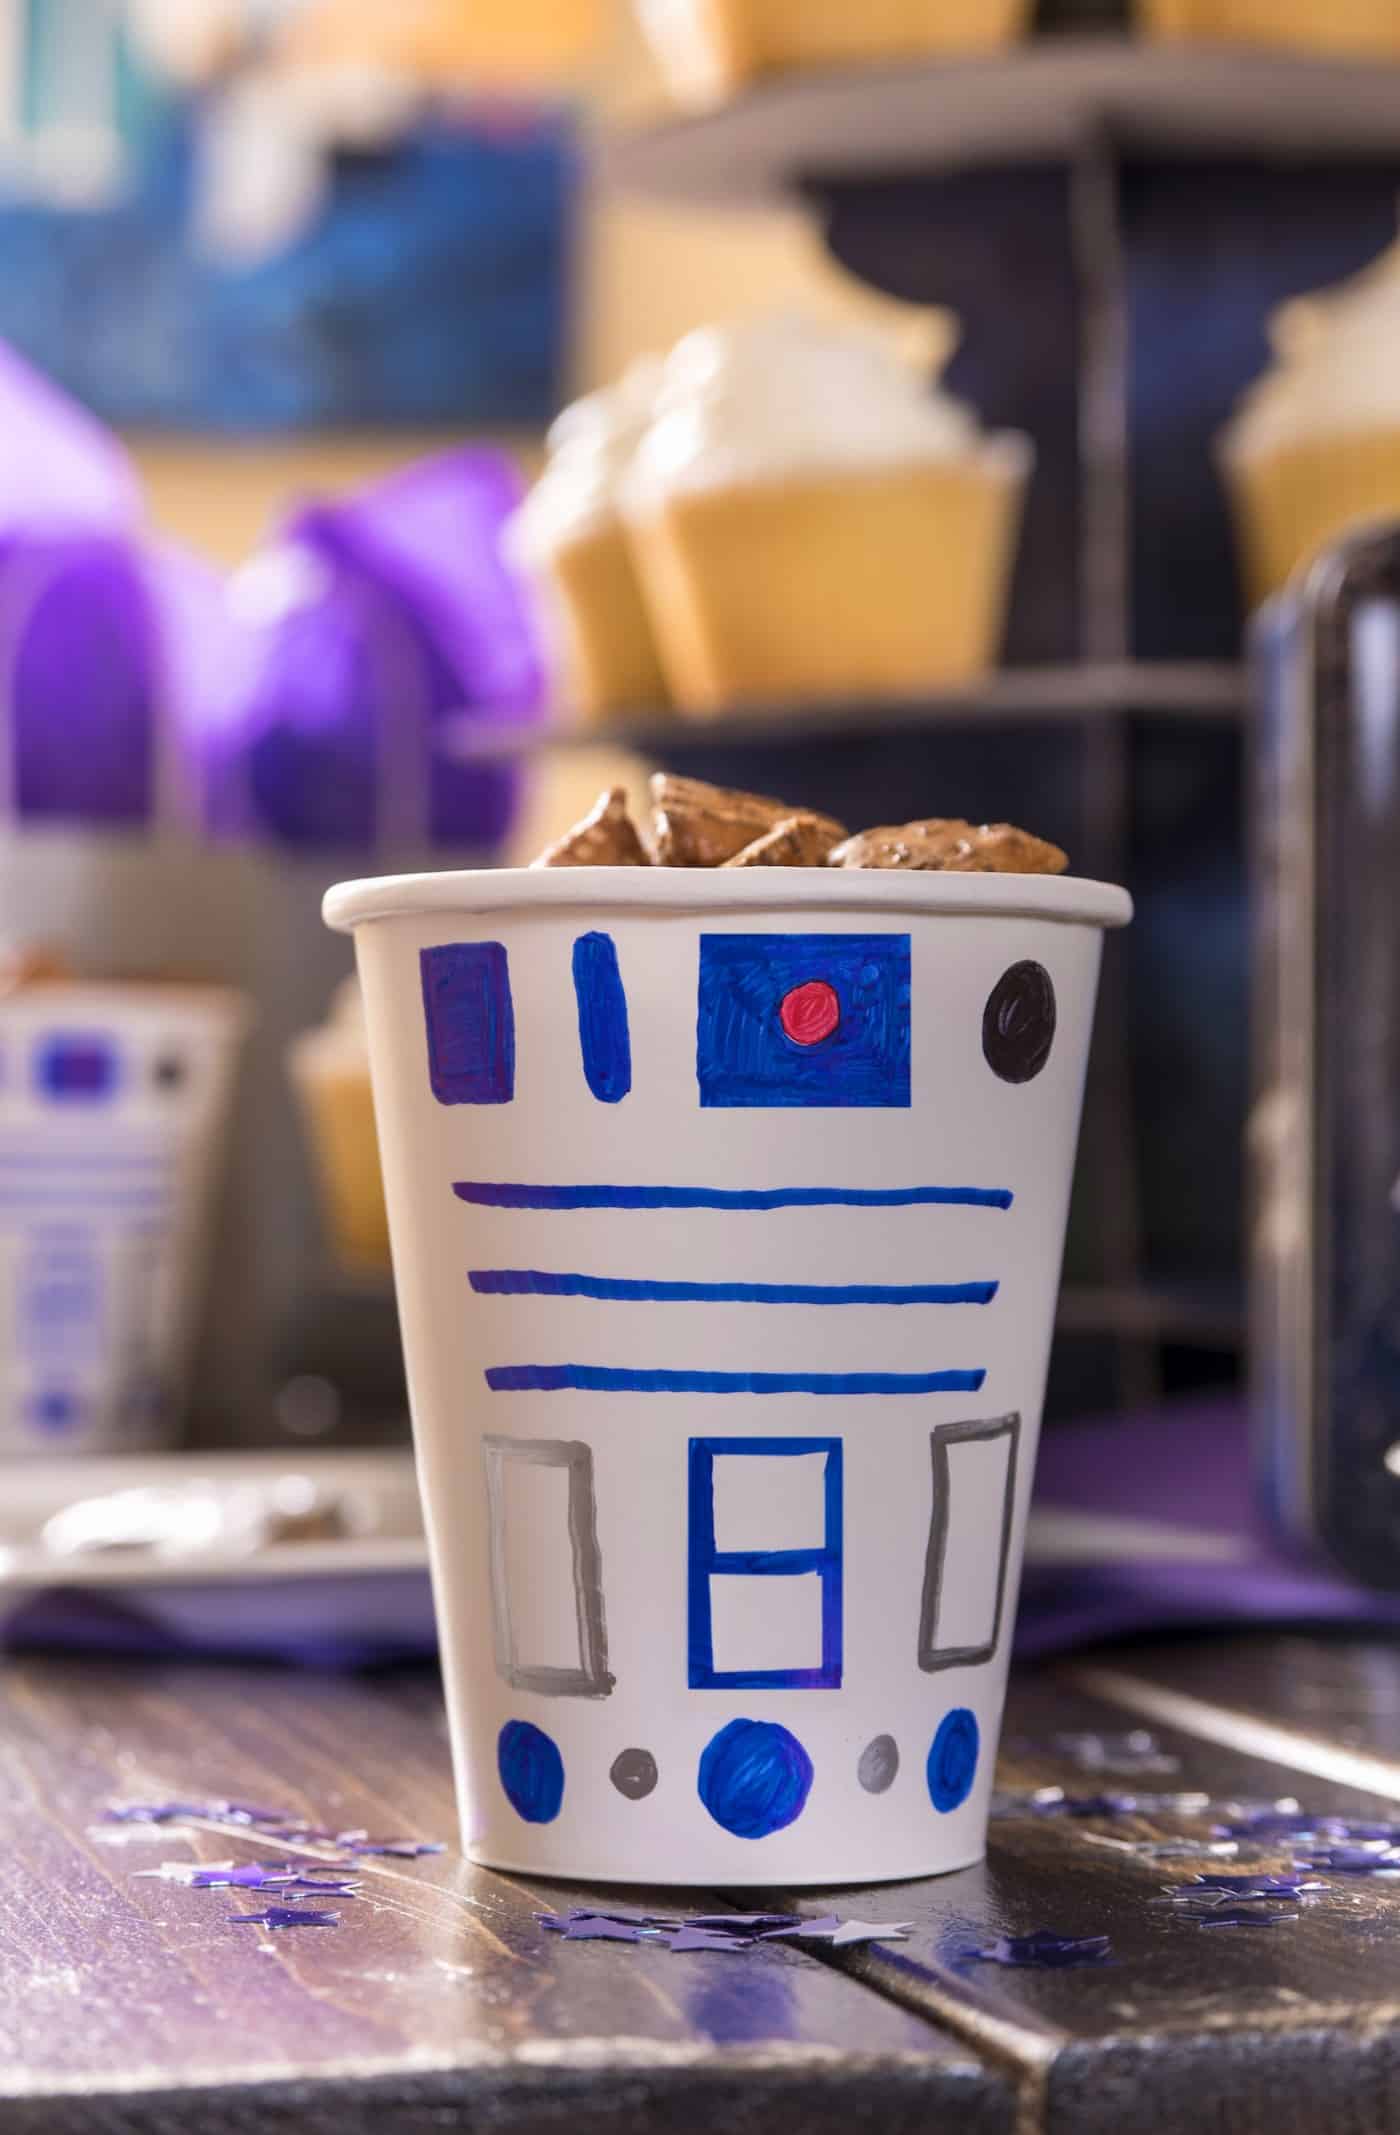 Learn how to have a Star Wars birthday party without blowing your kid's college fund! Here are my favorite tips and ideas including an R2-D2 DIY cup.